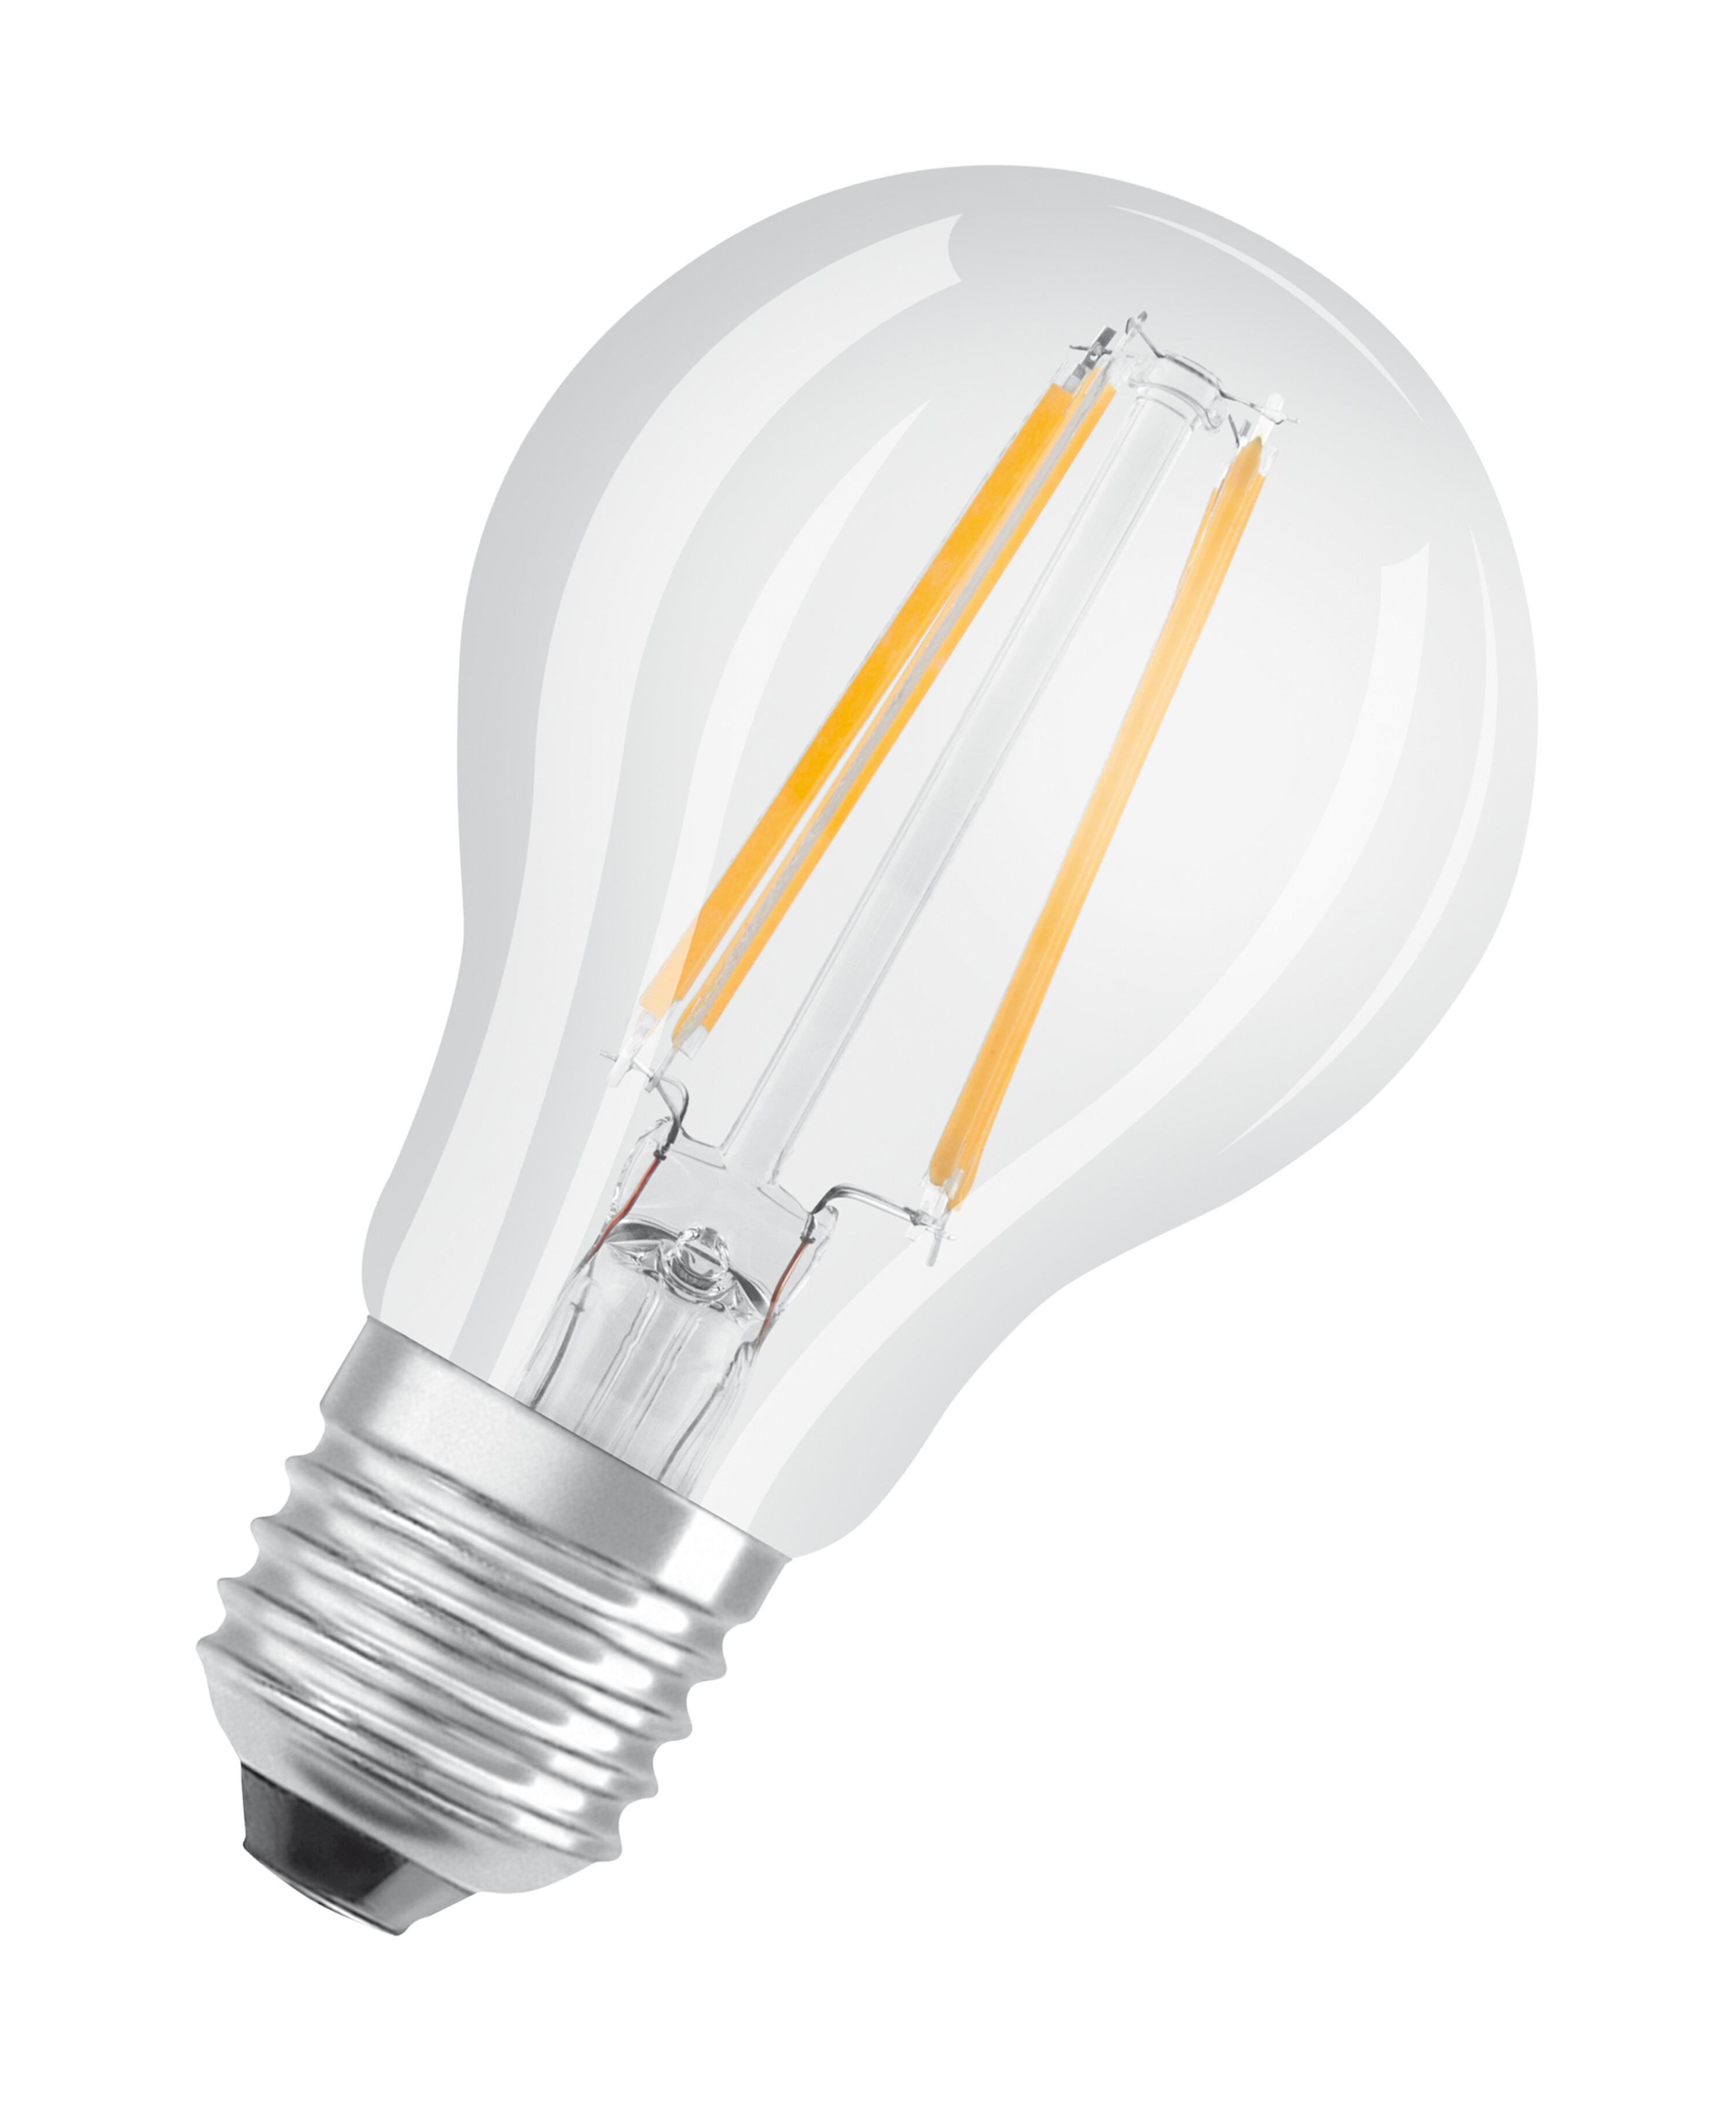 806 LED and CLASSIC Lumen Lampe ACTIVE RELAX Kaltweiß LED OSRAM  A